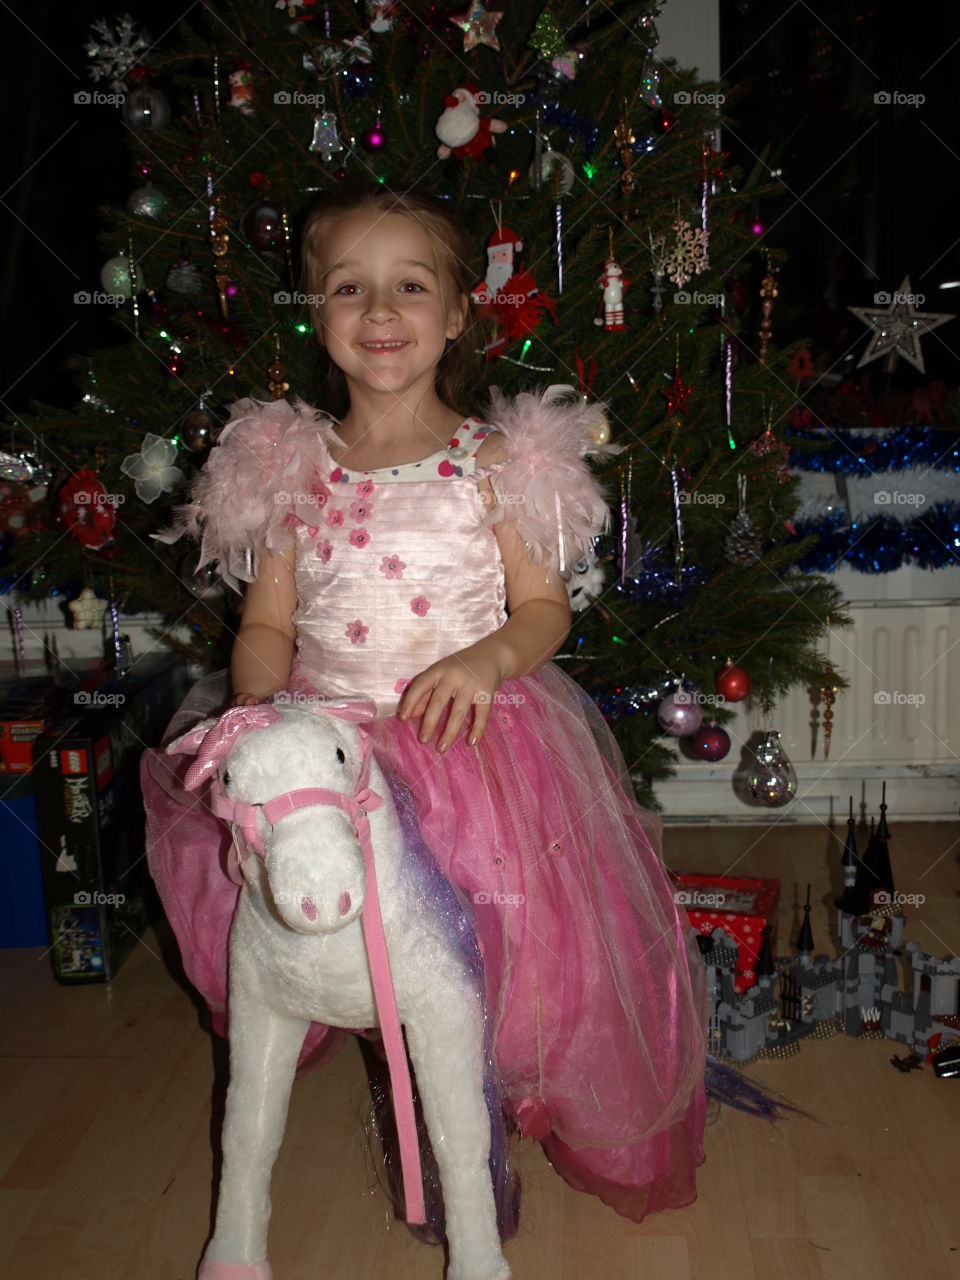 child dressed as a princess sitting on a unicorn by a large Christmas tree.